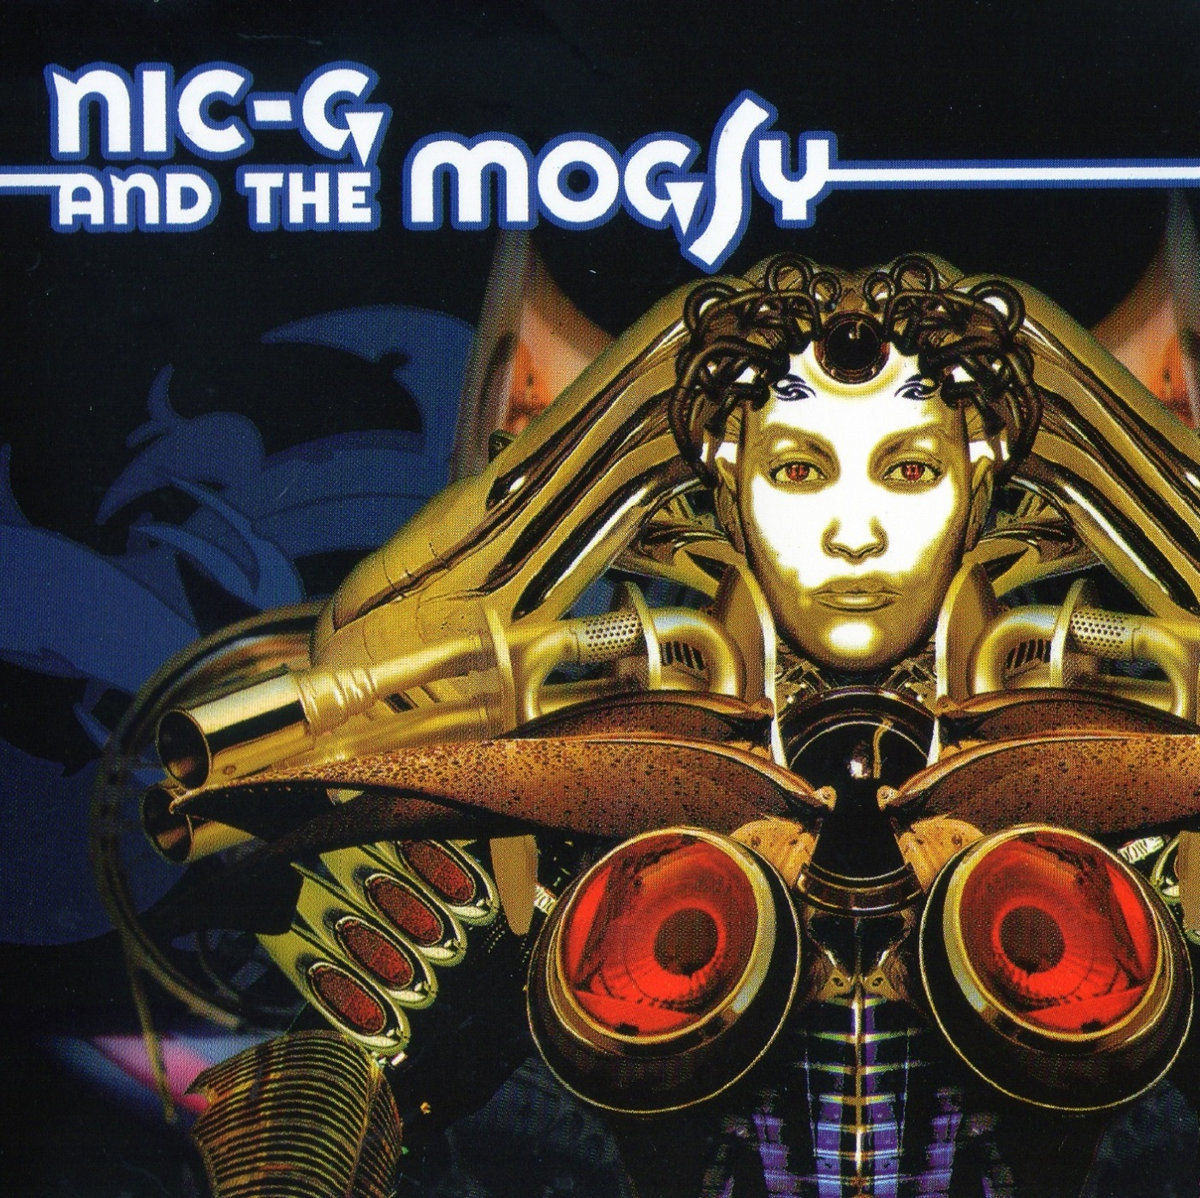 Nic-G and the Mogsy | NIC-G AND THE MOGSY | Mellow label productions